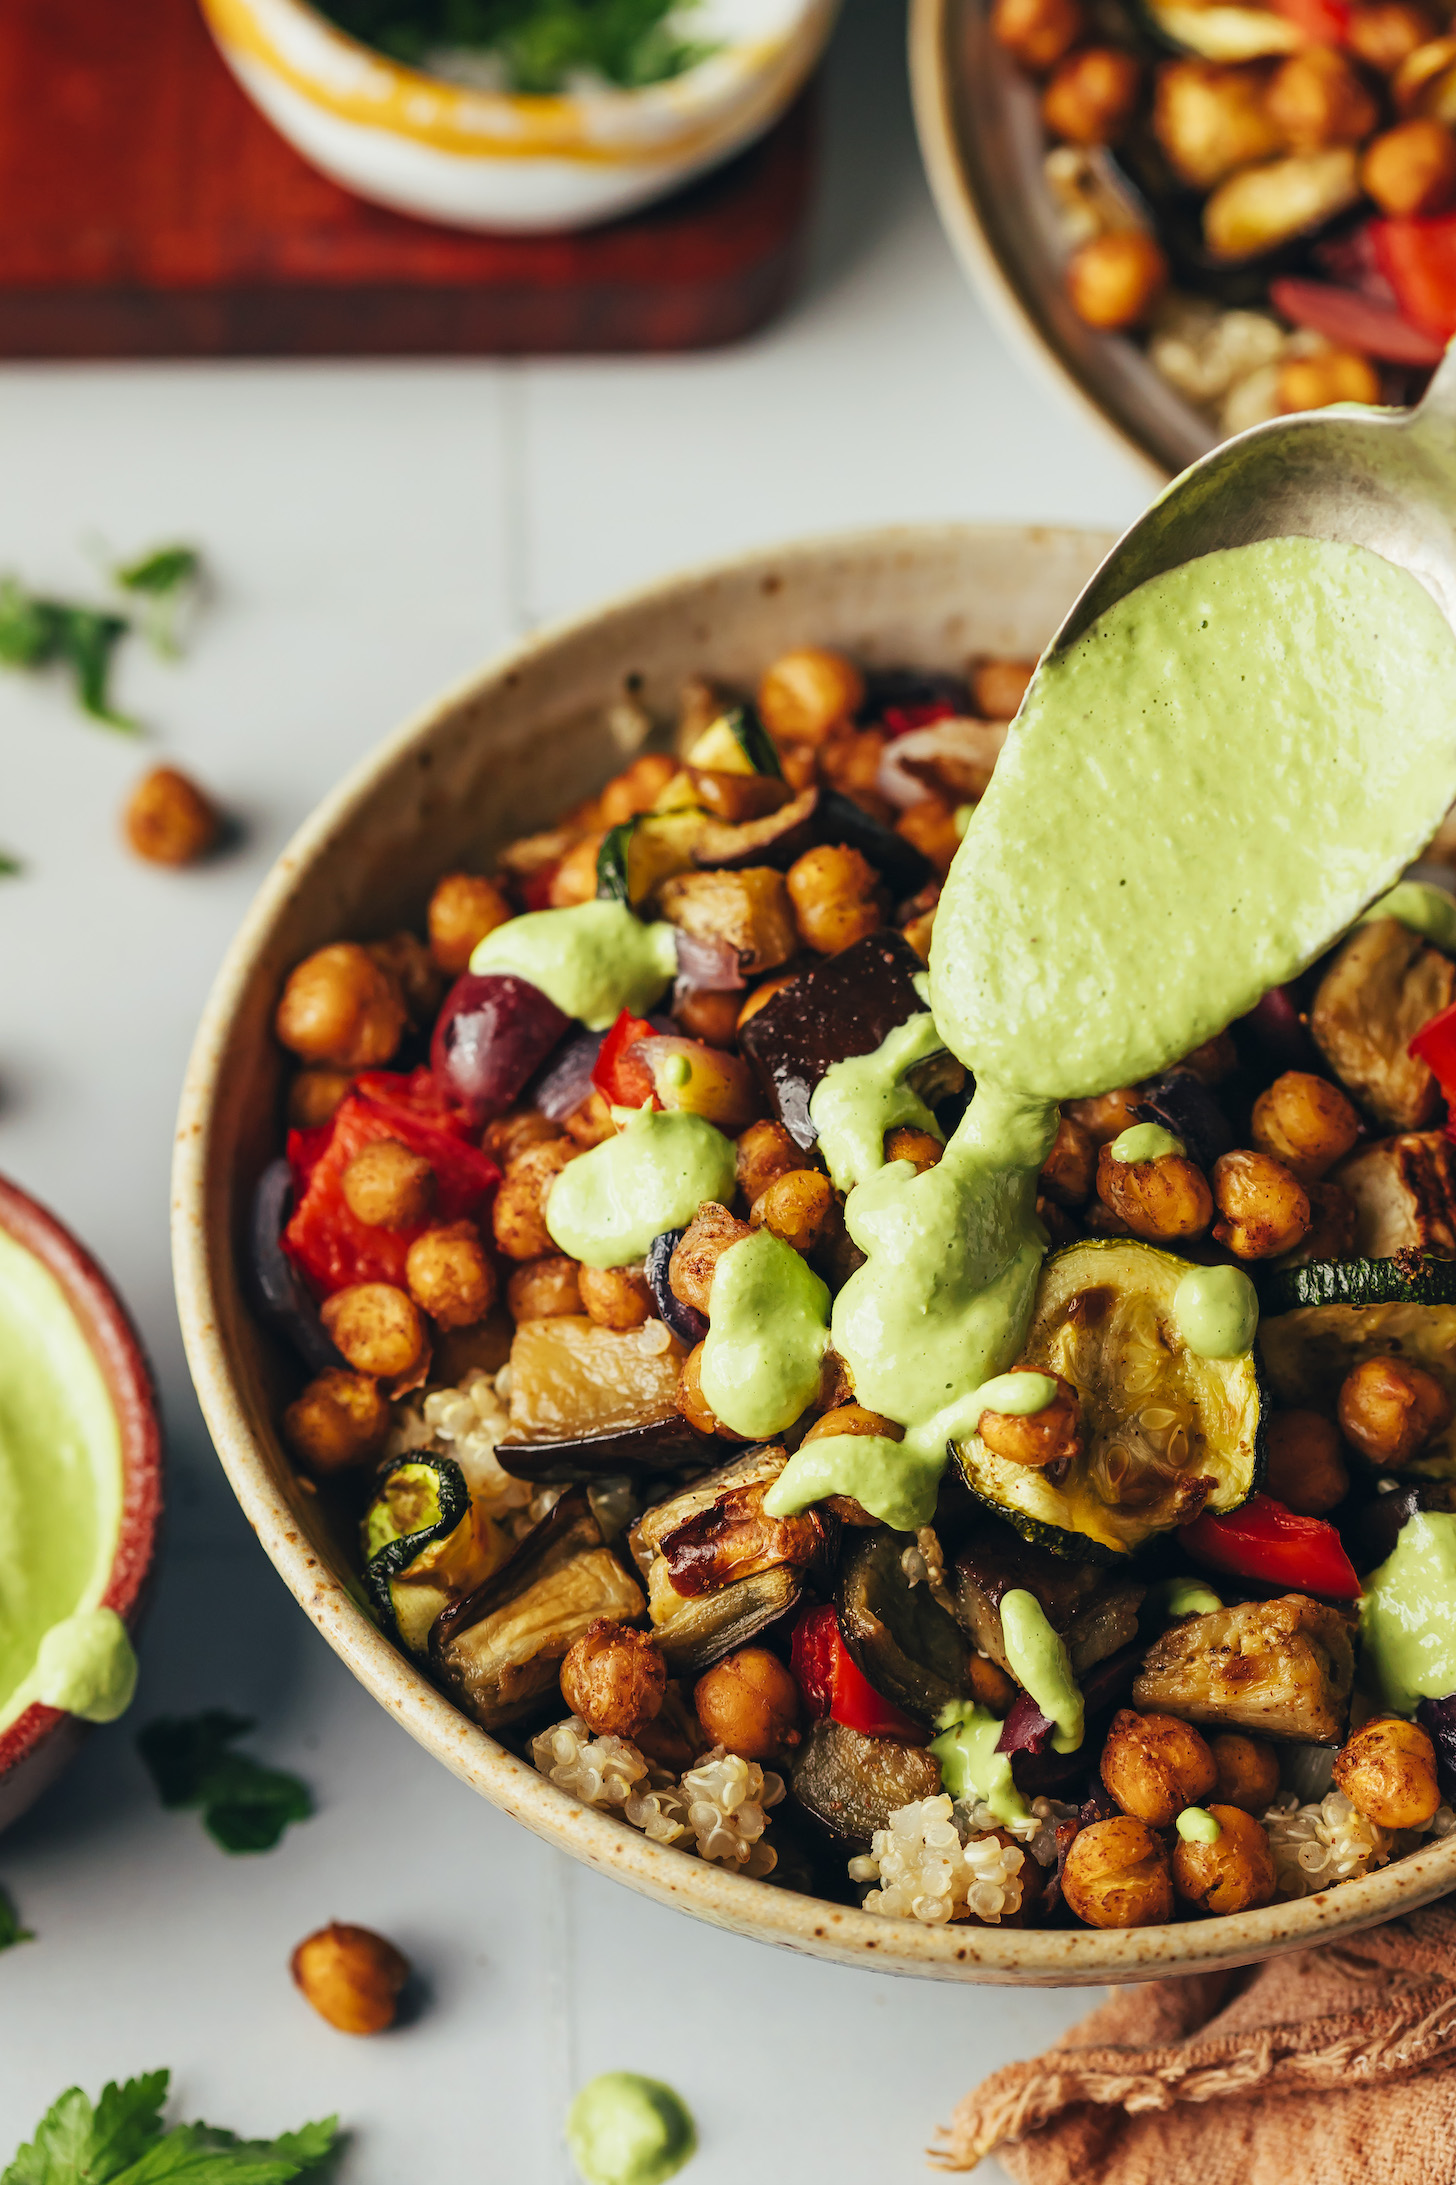 Drizzling green tahini sauce onto a bowl of roasted veggies, chickpeas, and quinoa